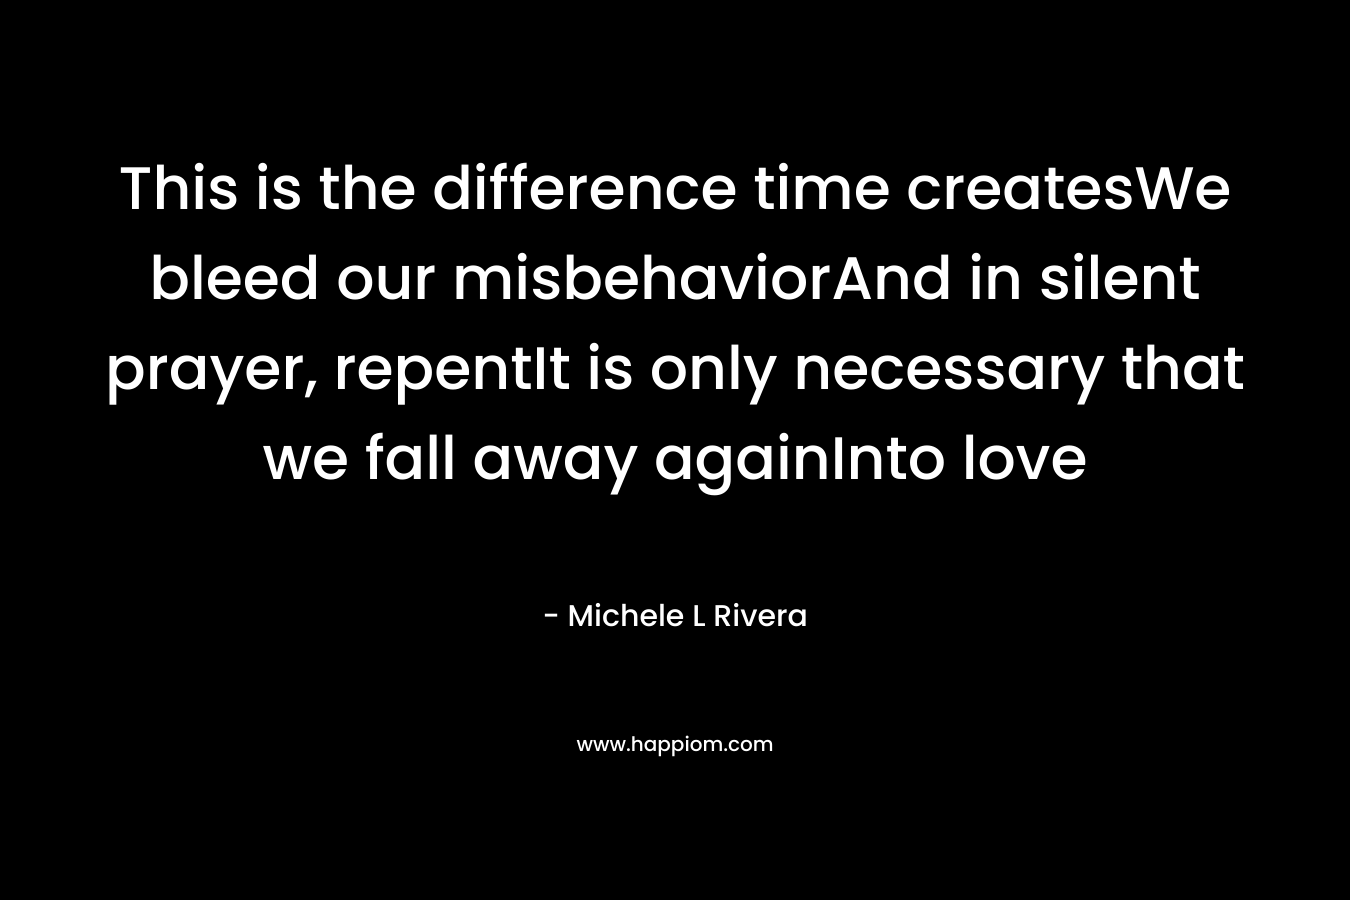 This is the difference time createsWe bleed our misbehaviorAnd in silent prayer, repentIt is only necessary that we fall away againInto love – Michele L Rivera